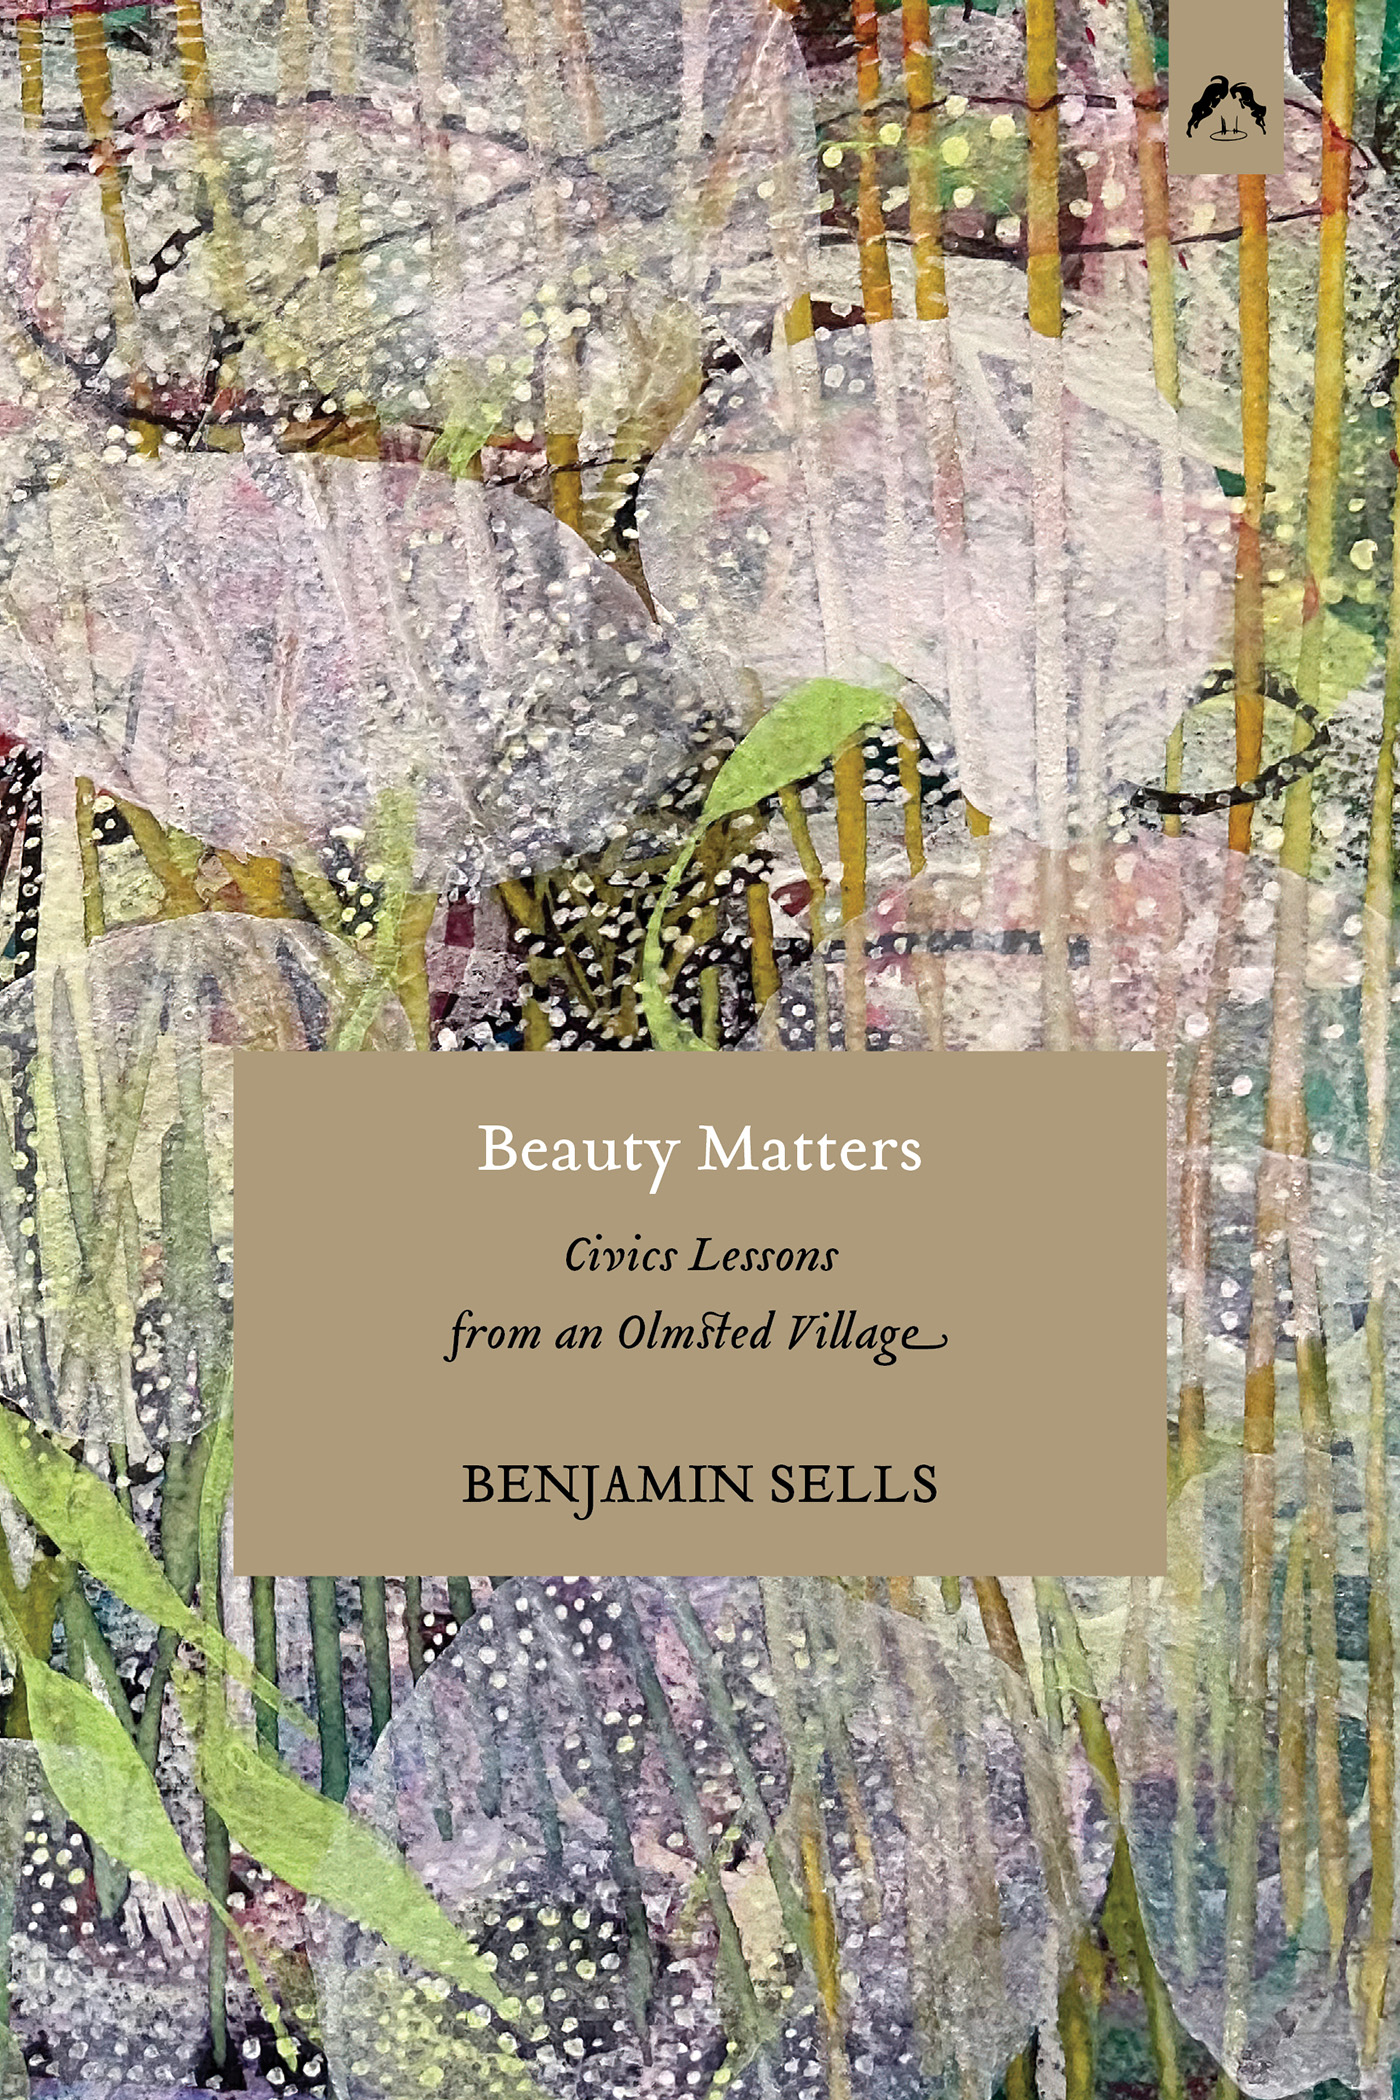 Cover for BEAUTY MATTERS with Art by Margot McLean